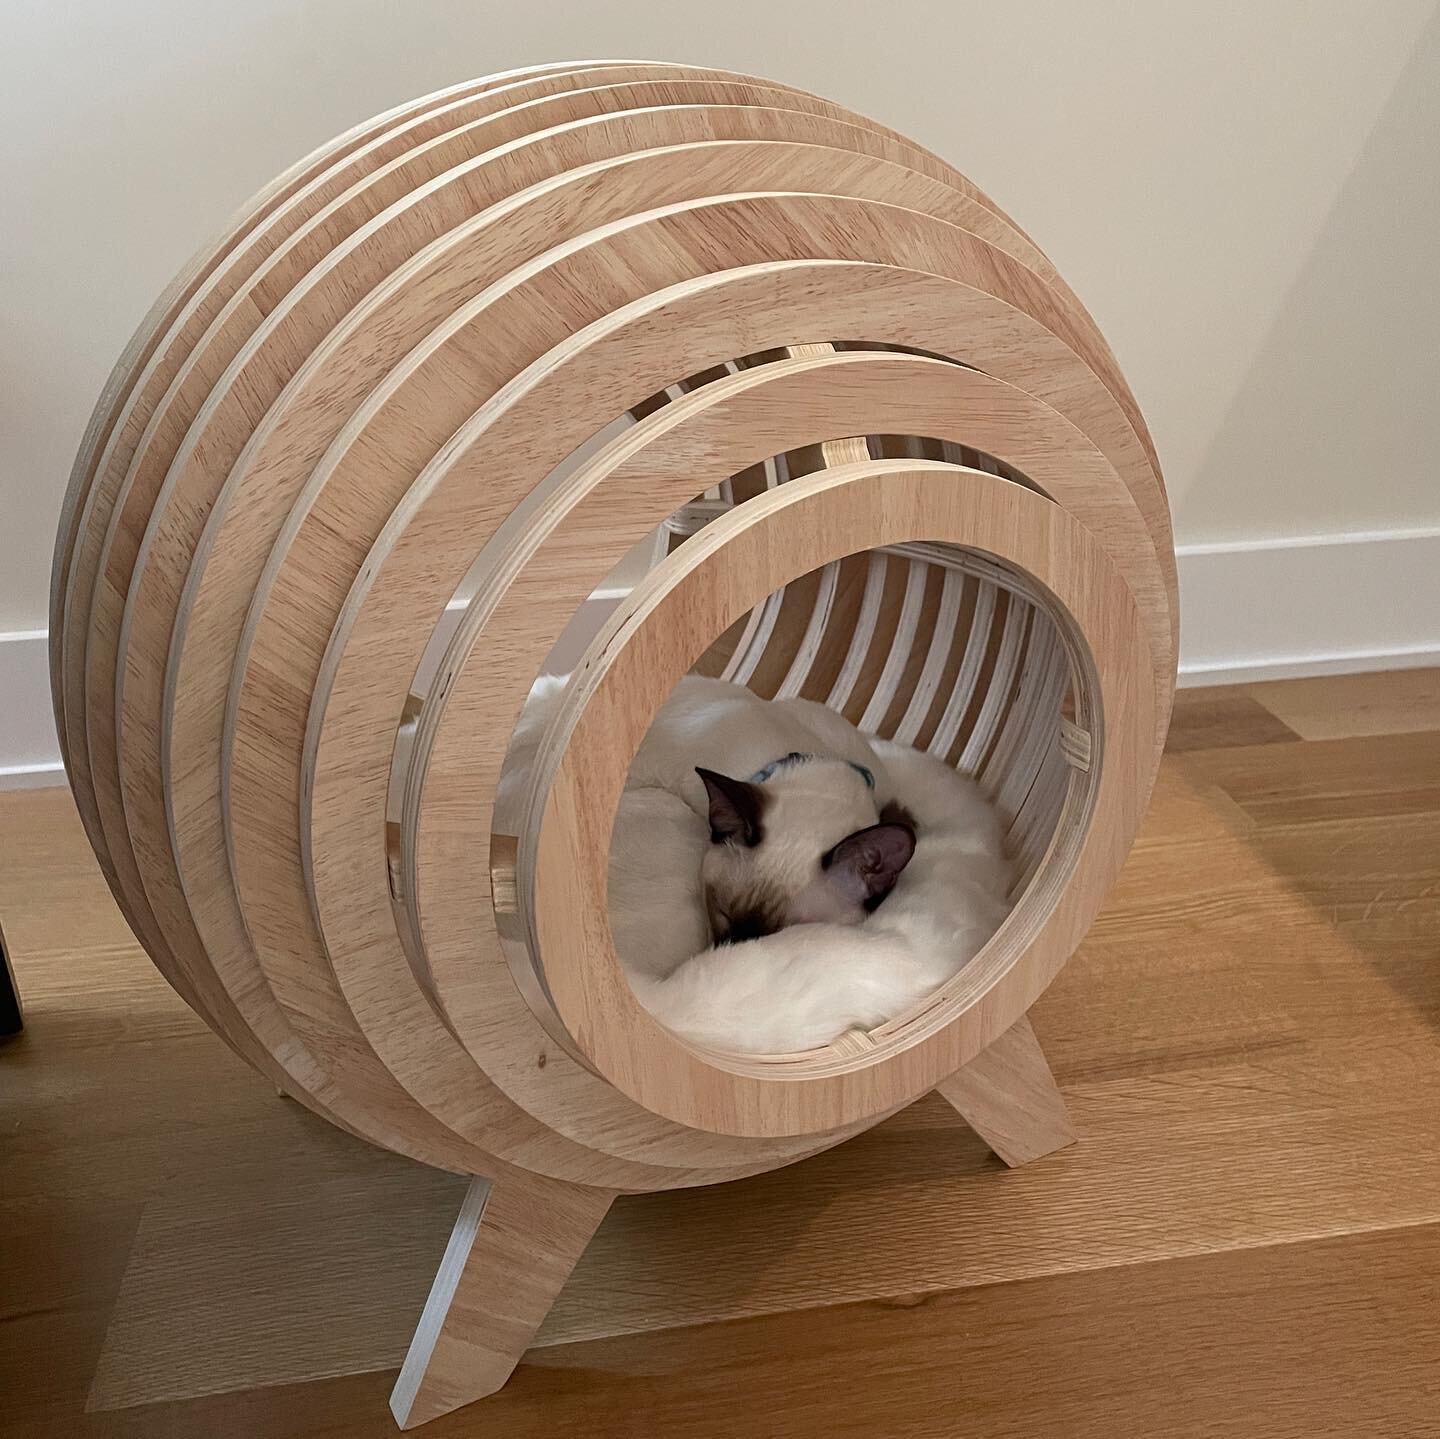 The boys are loving their new modern kitty furniture!